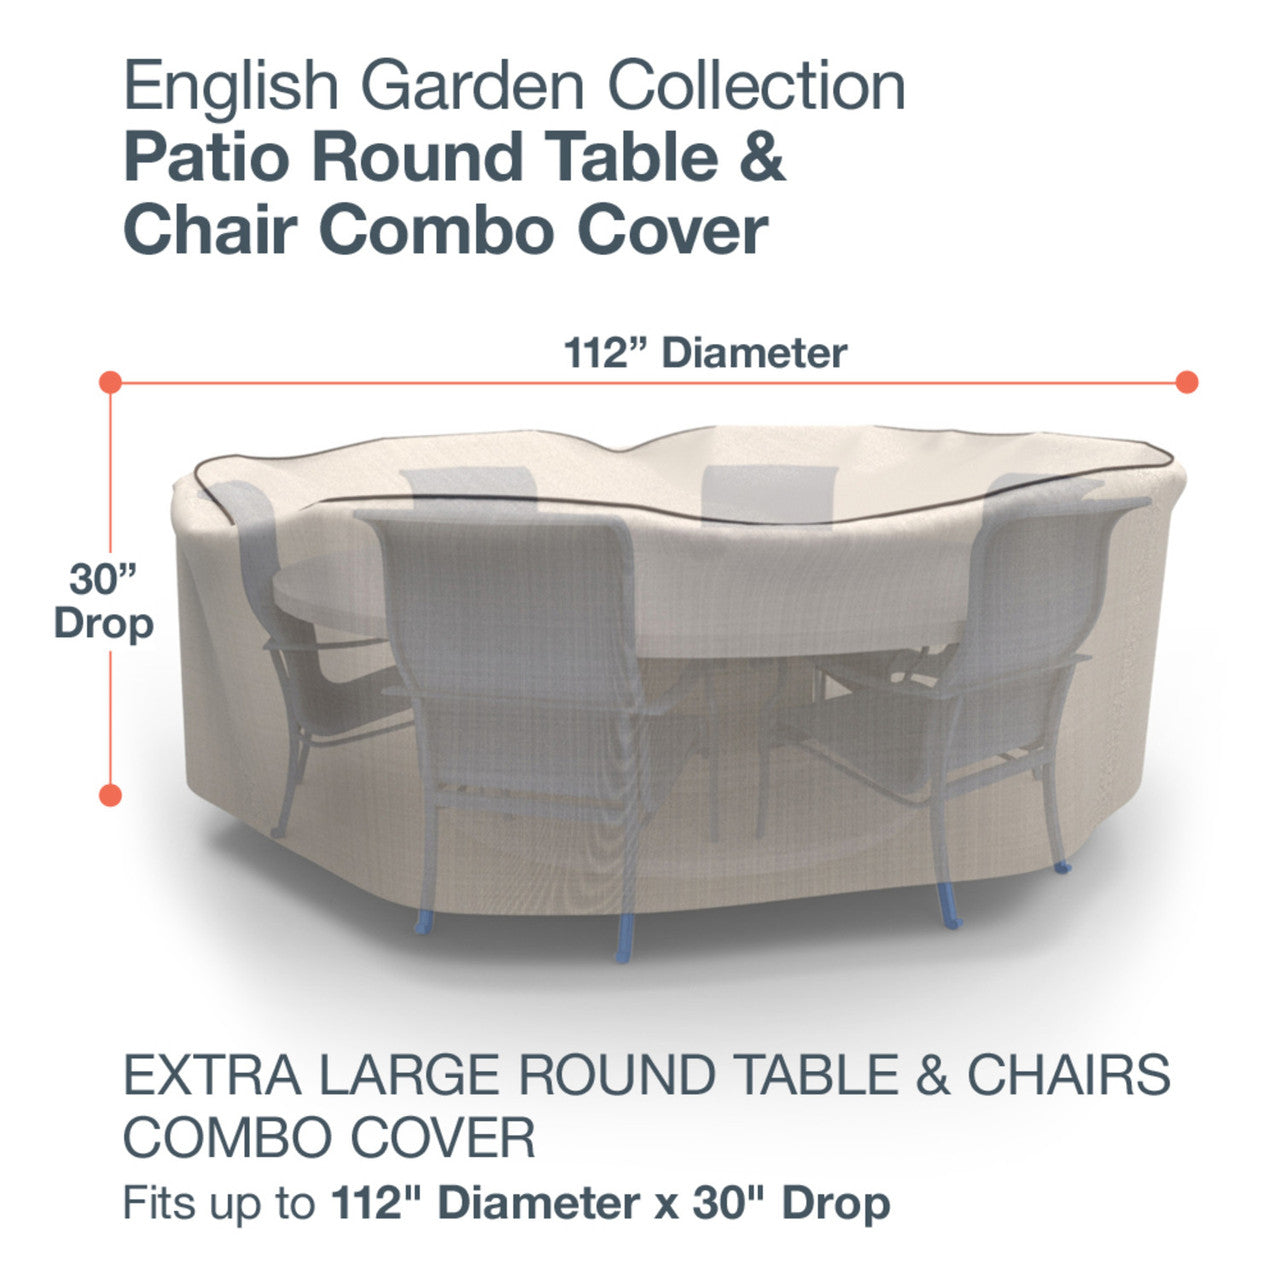 Budge Industries English Garden Round Patio Table/Chairs Combo Cover